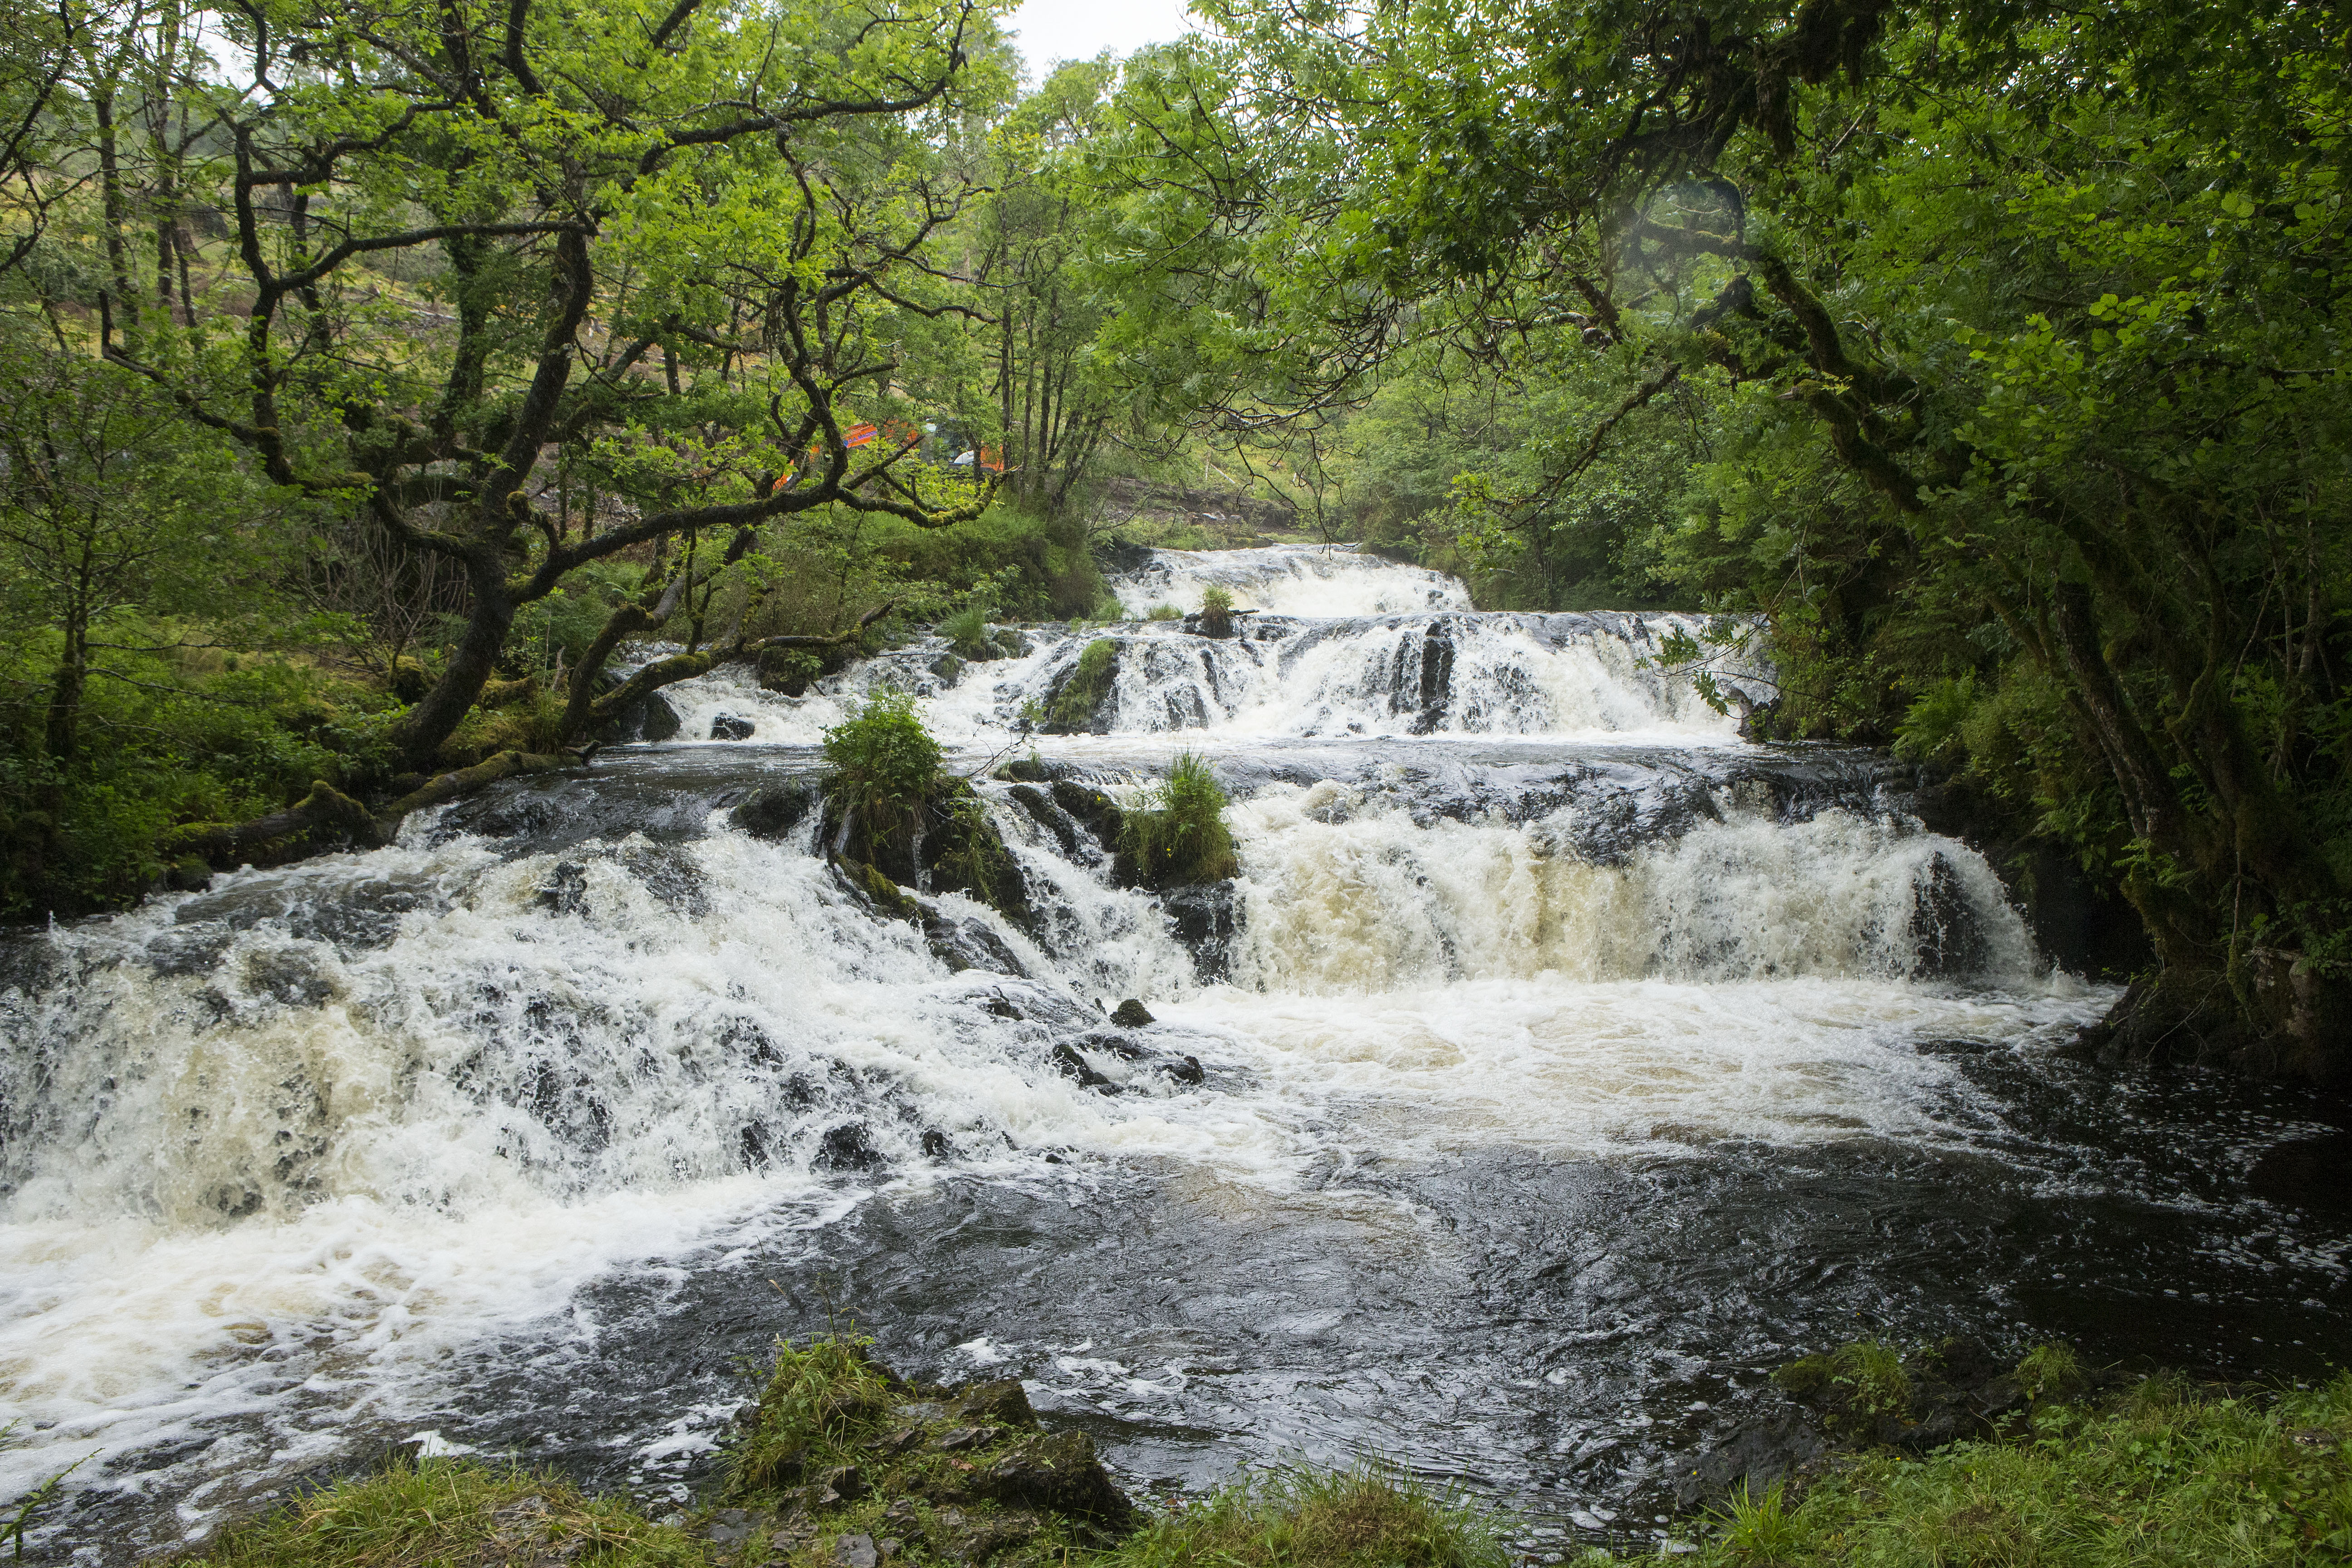 The waterfall at Glen Righ